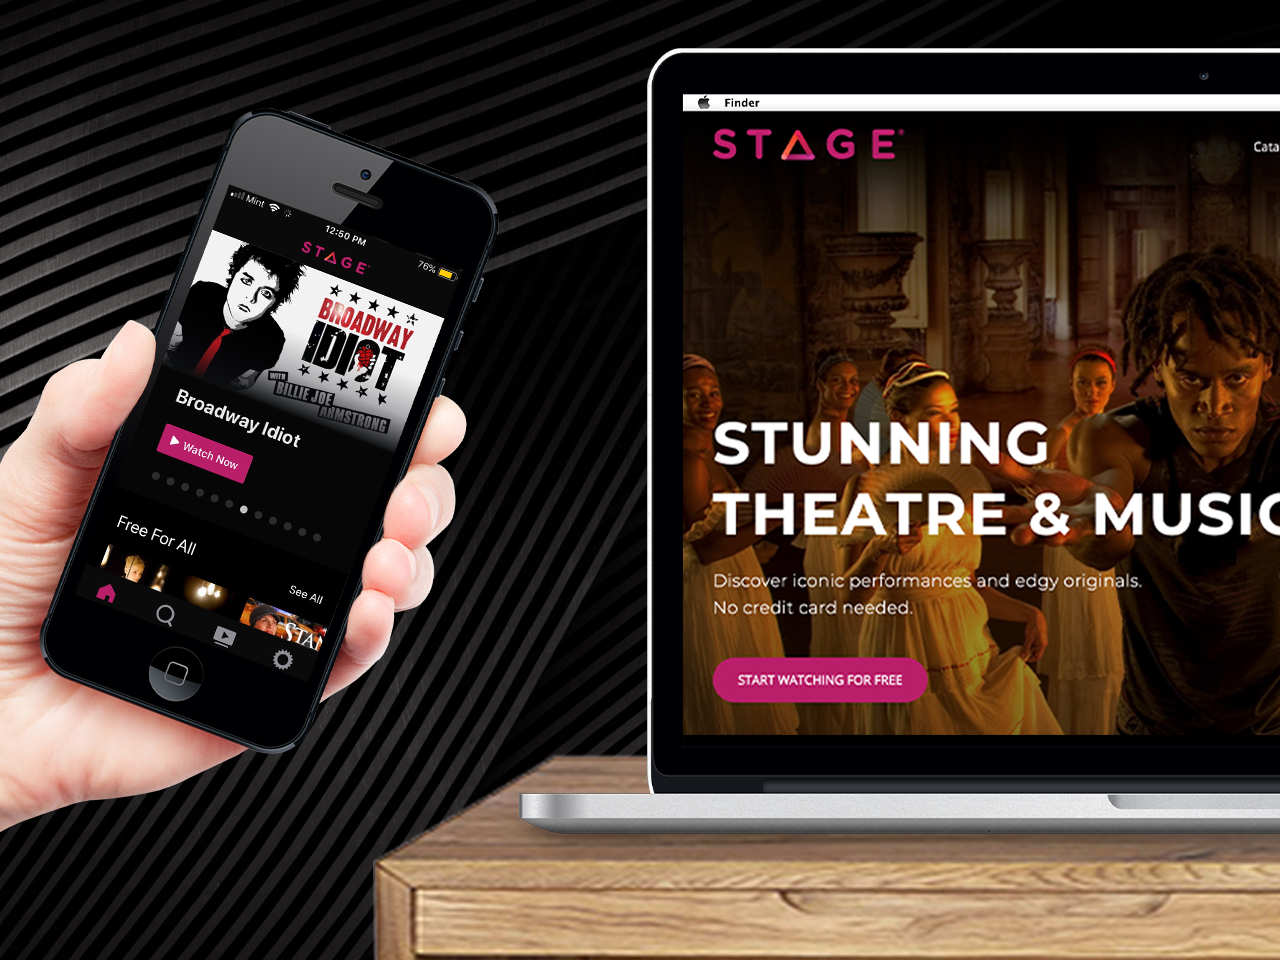 GOT SHOWS? THEATRE STREAMING SERVICE STAGE WANTS TO HOST THEM - FOR FREE!